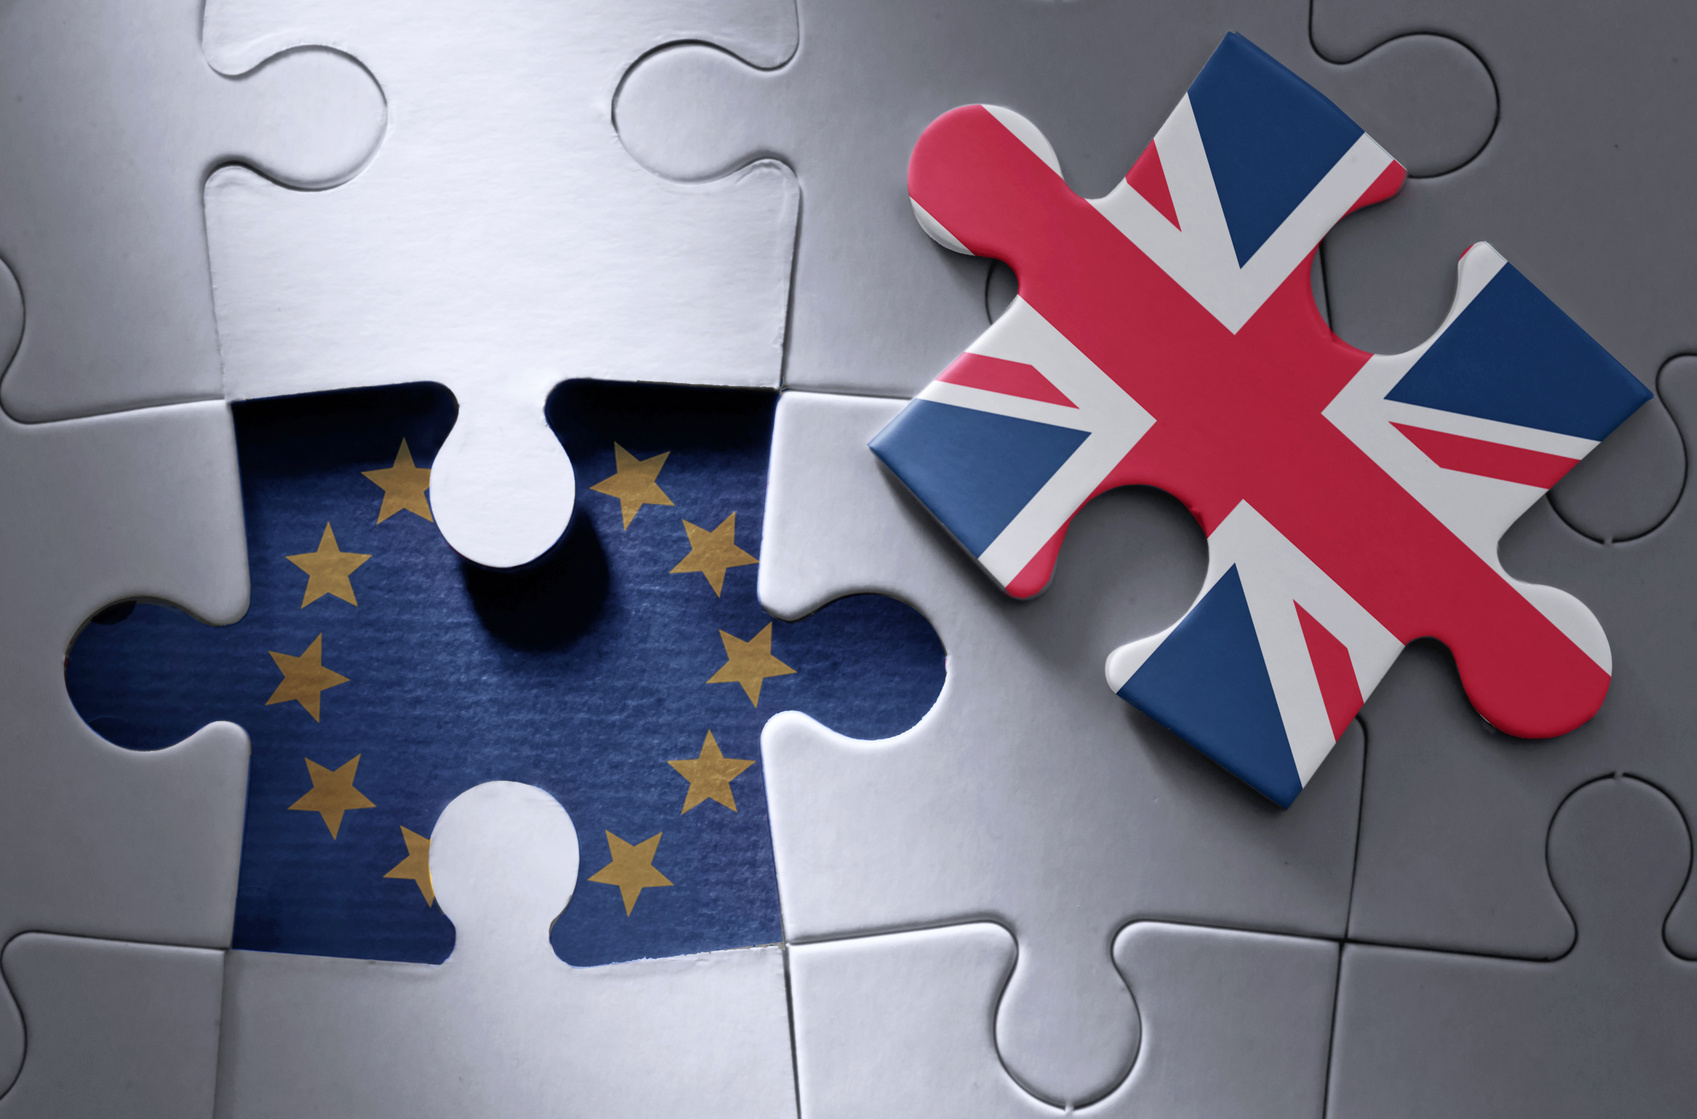 image of jigsaw puzzle wih EU flag and Union Jack flag pieces